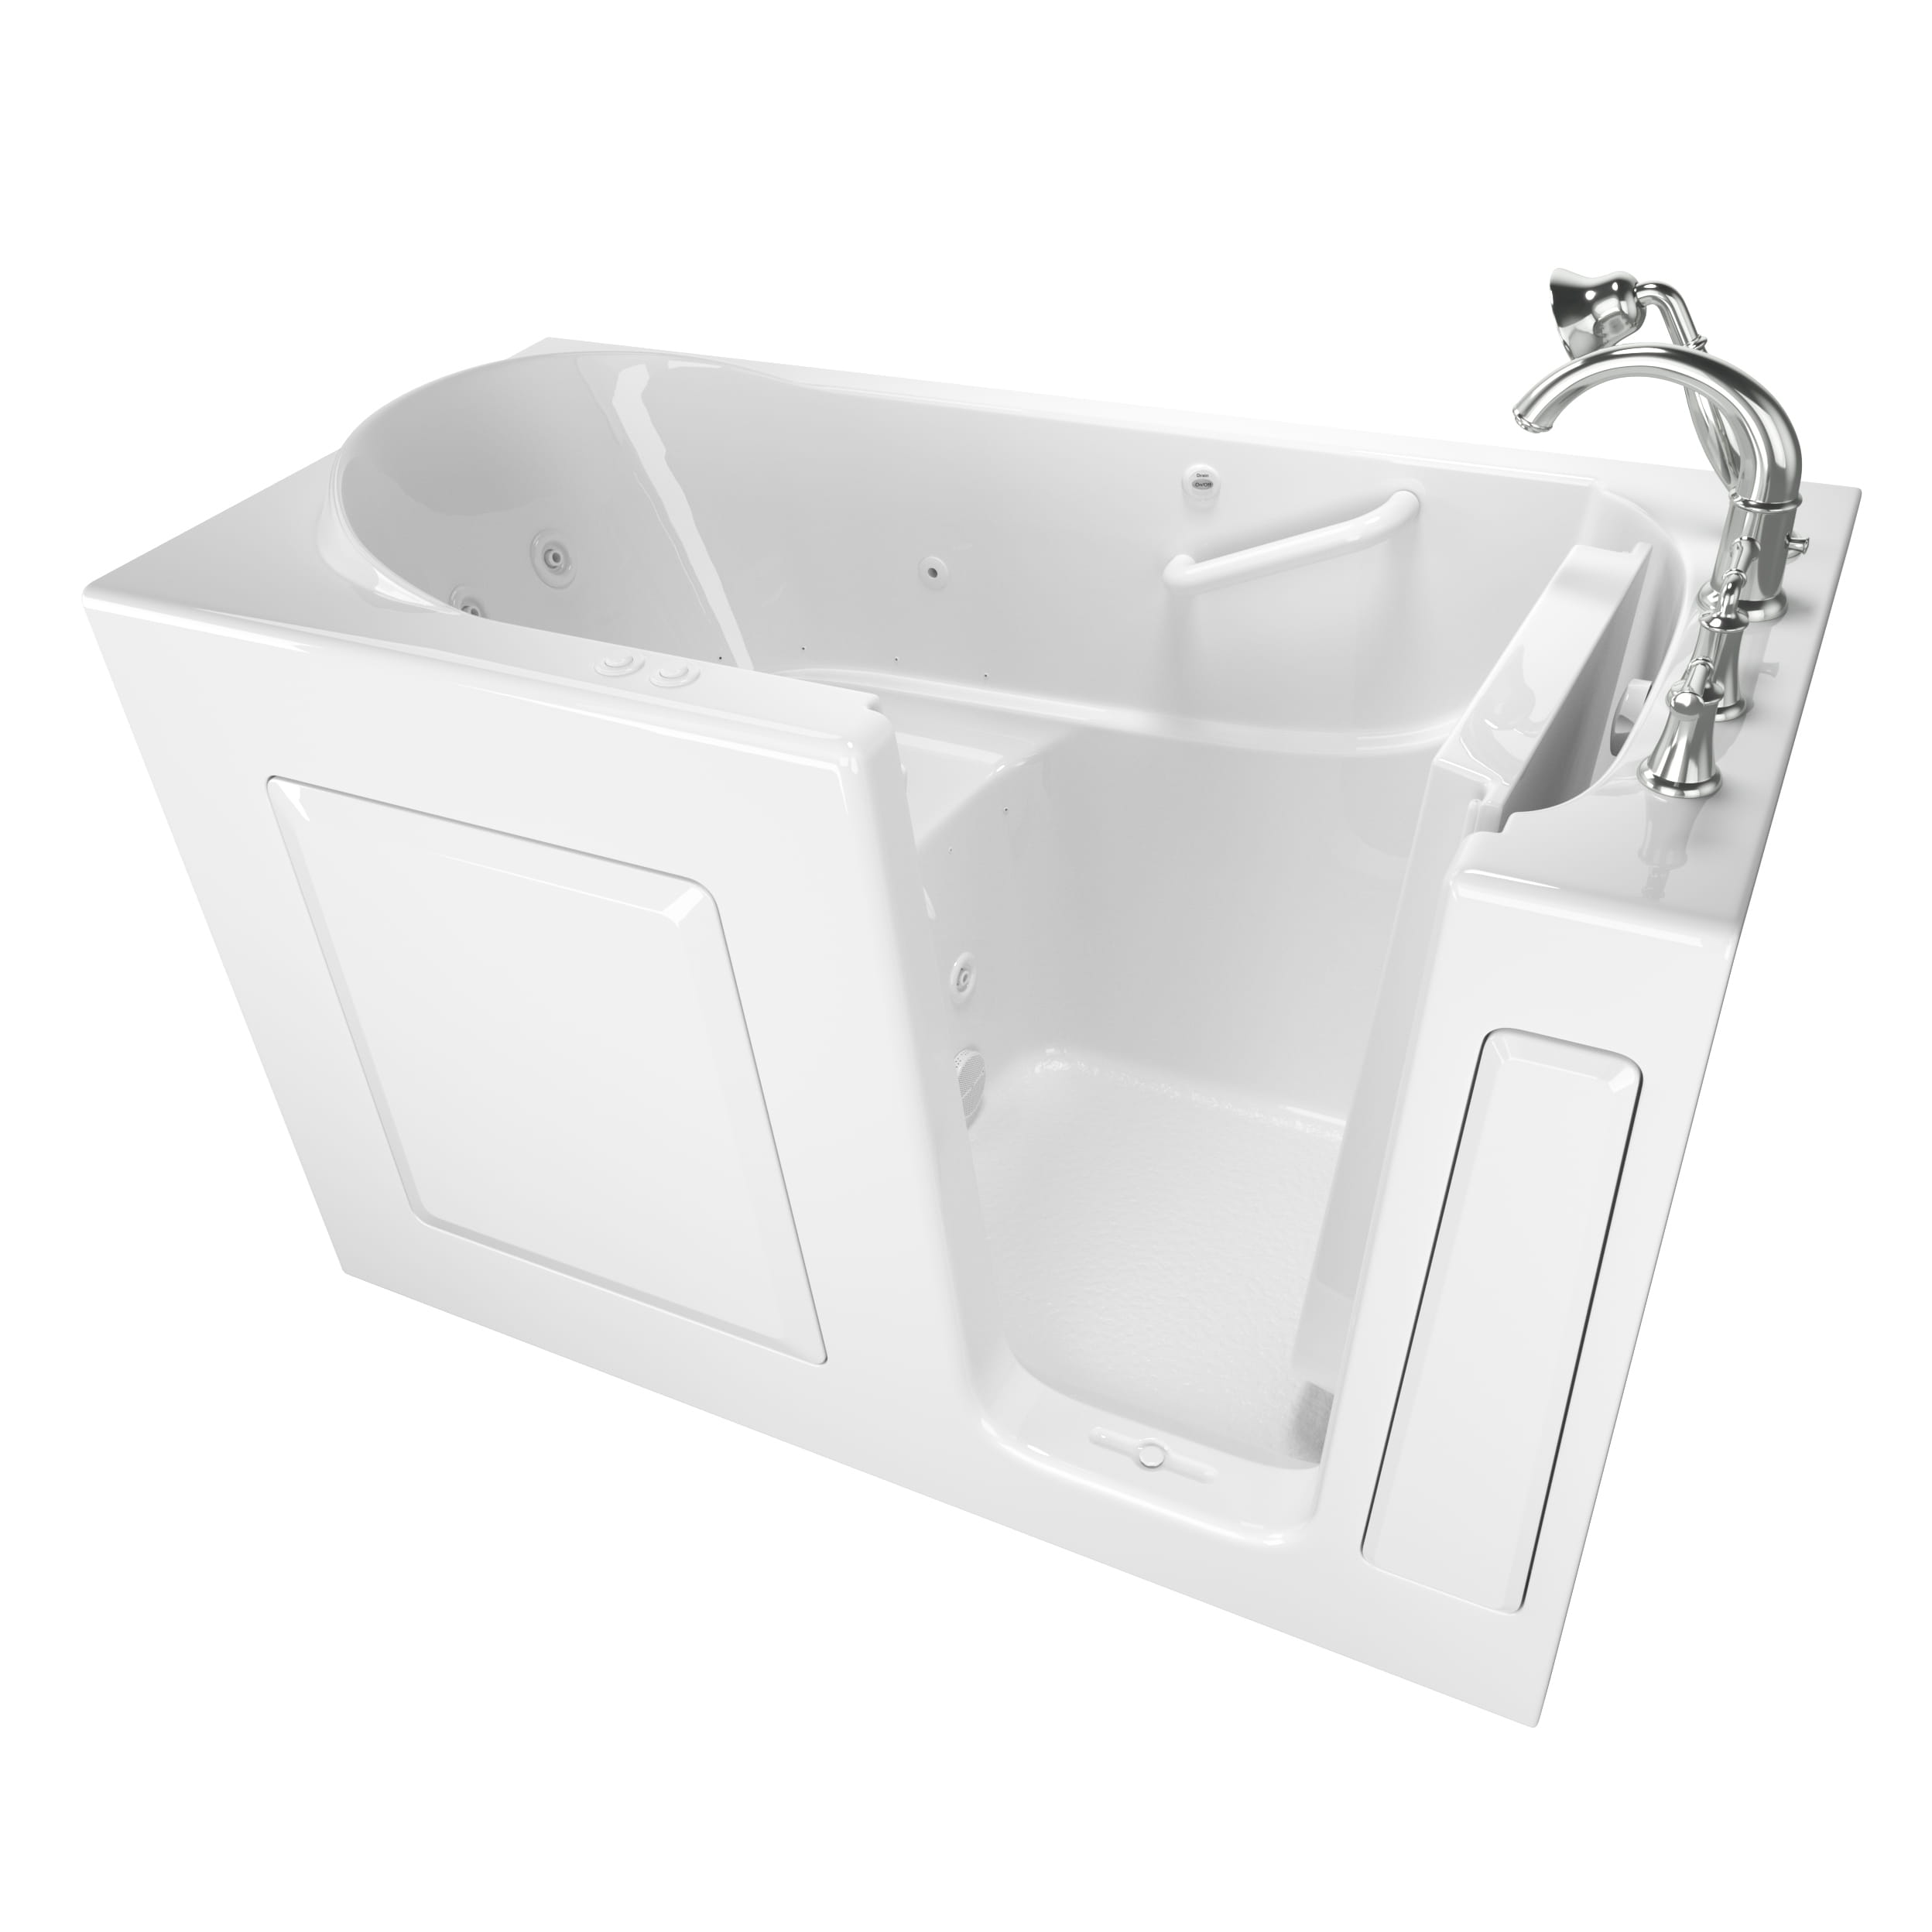 Gelcoat Value Series 30 x 60  Inch Walk in Tub With Combination Air Spa and Whirlpool Systems   Right Hand Drain With Faucet WIB WHITE